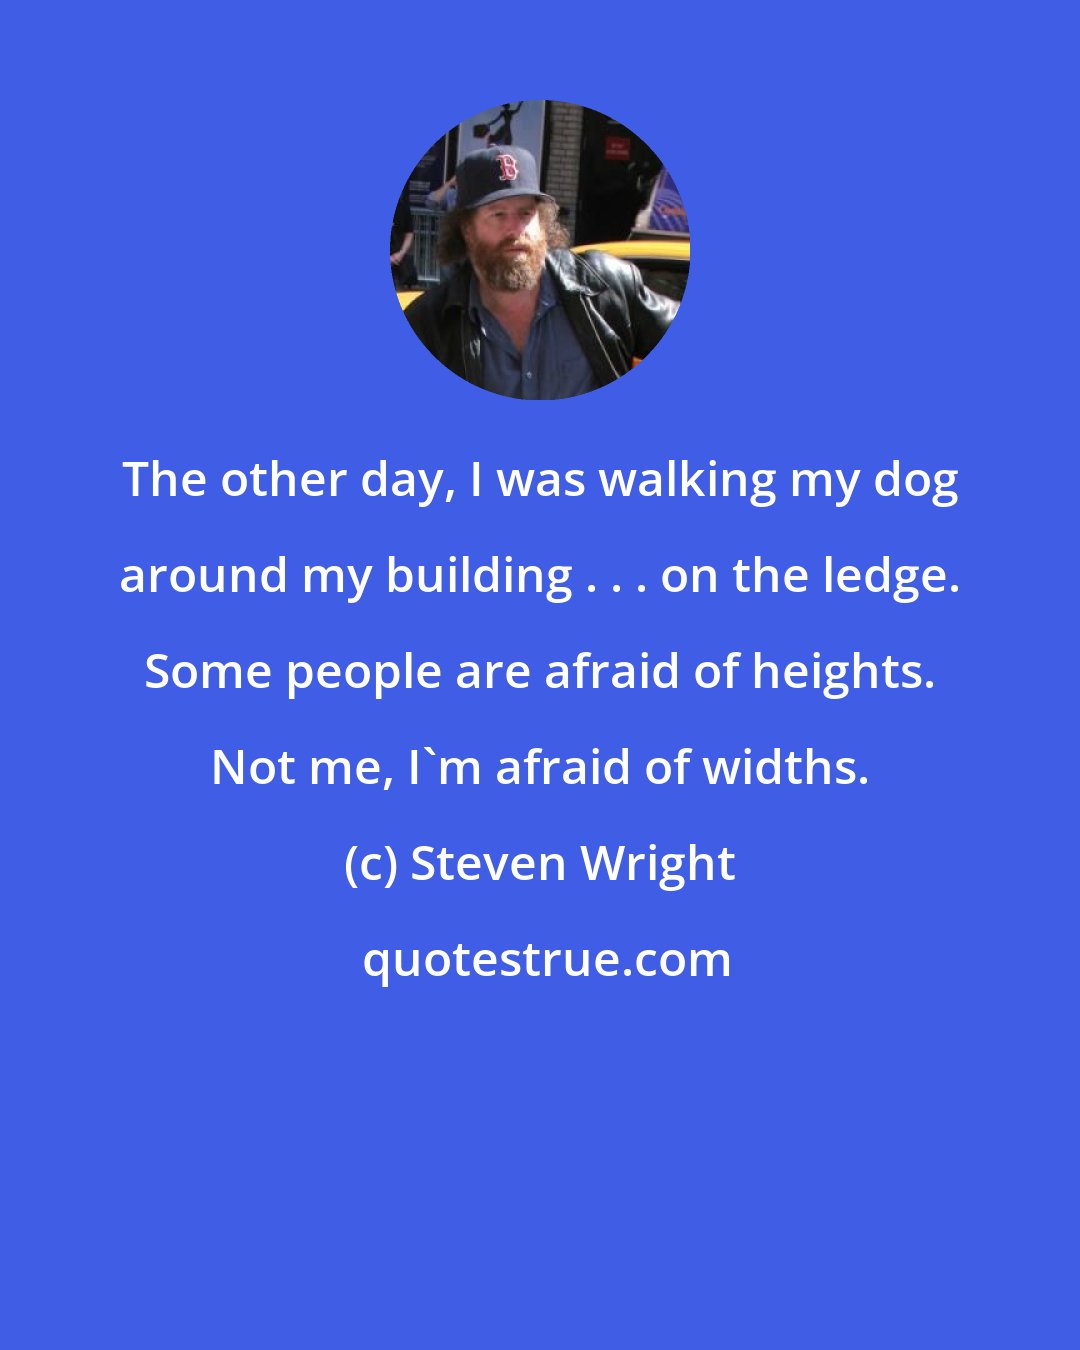 Steven Wright: The other day, I was walking my dog around my building . . . on the ledge. Some people are afraid of heights. Not me, I'm afraid of widths.